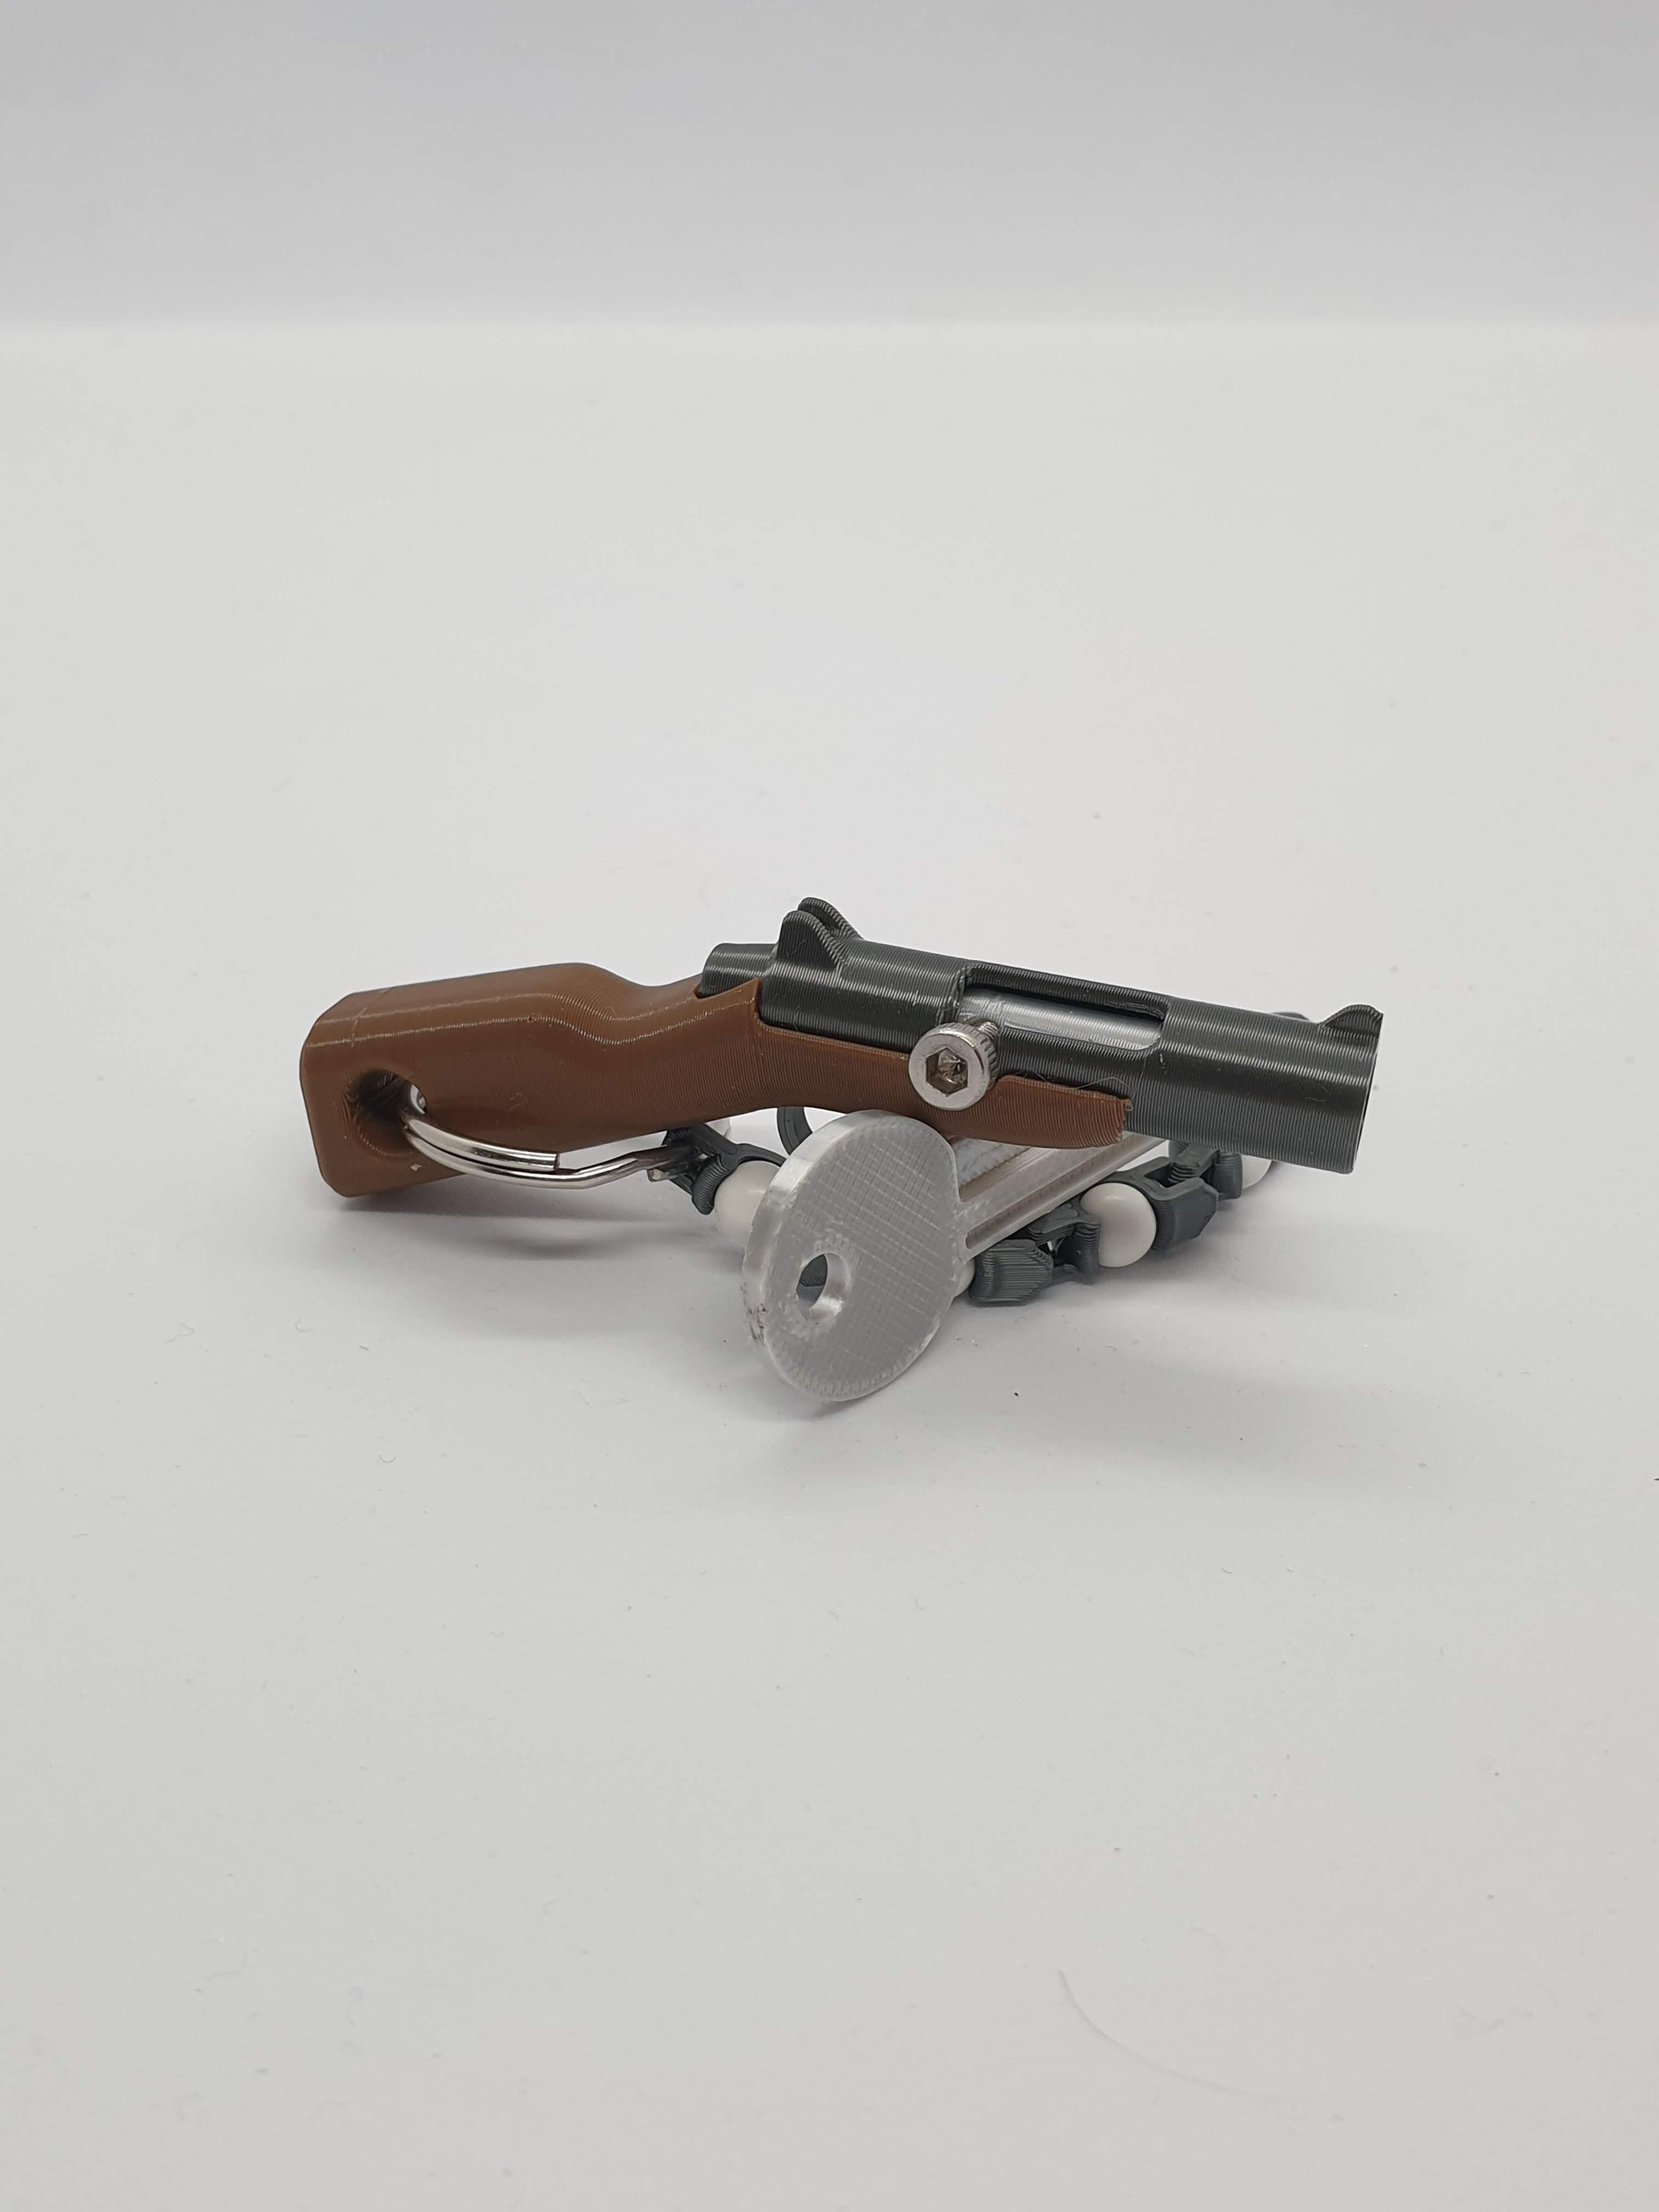 NEW RELEASE: Bolt action rifle toy keychain